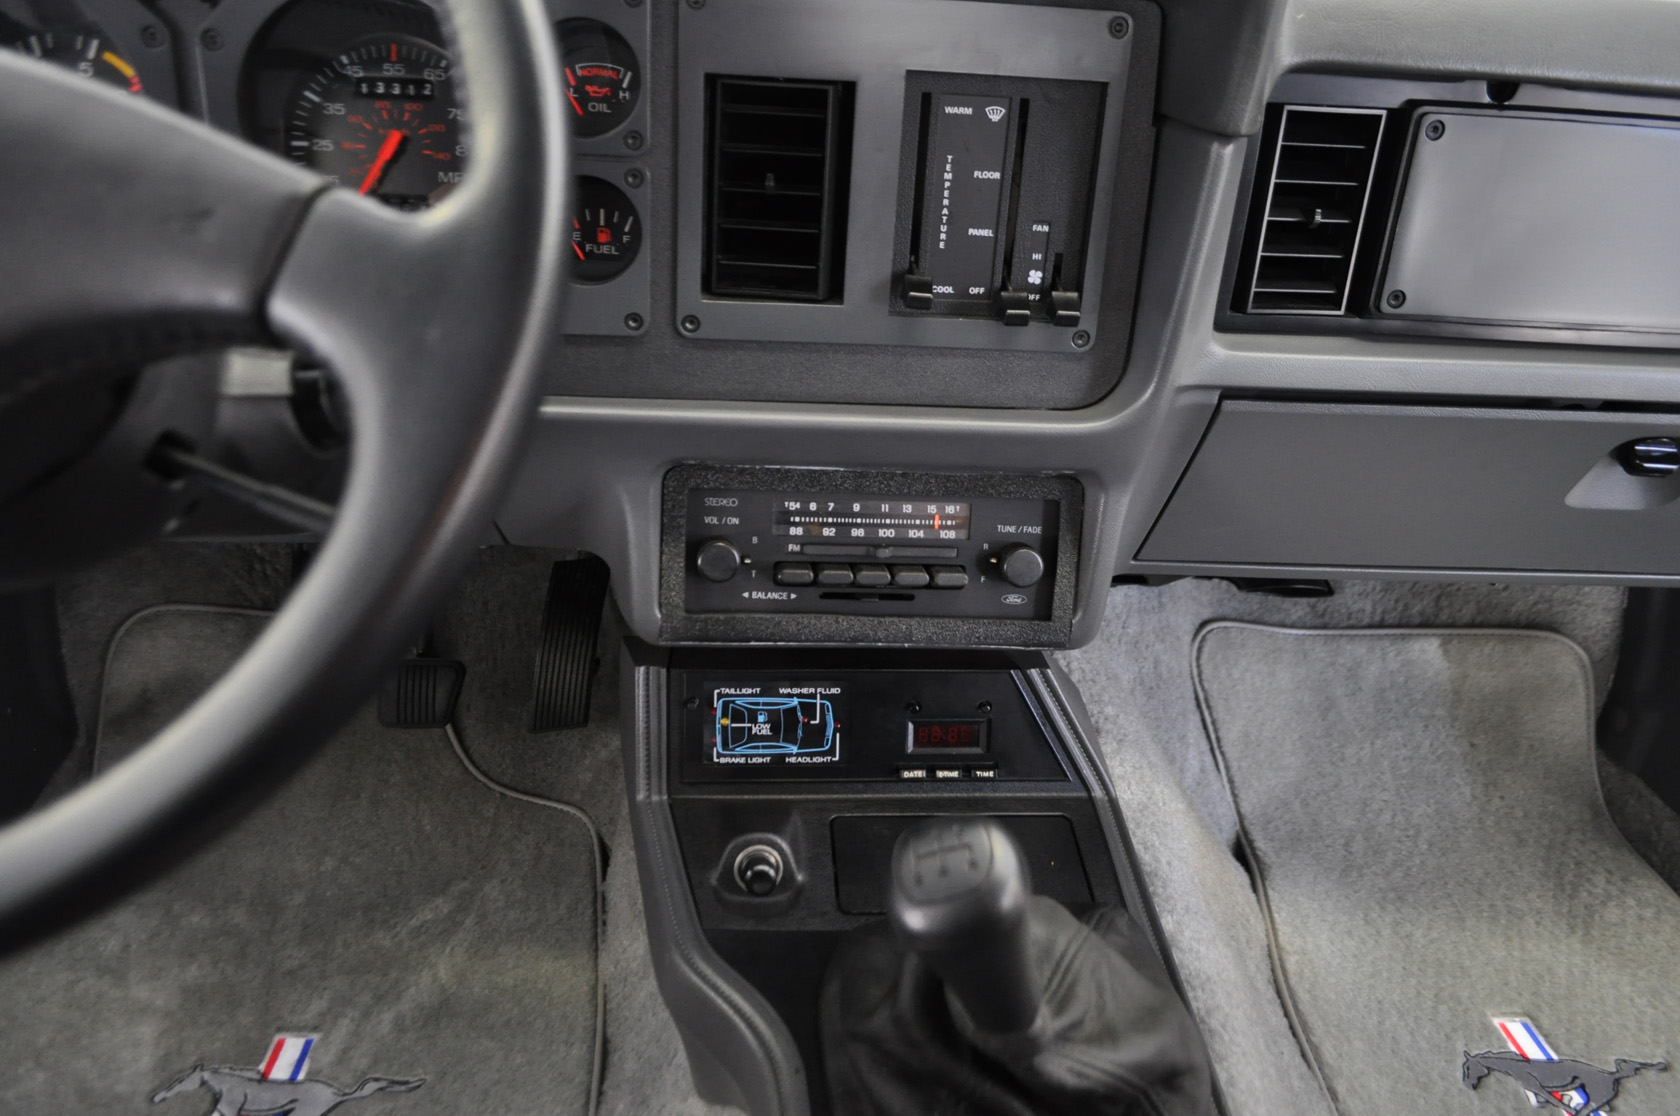 1985 Mustang Gt Interior Ford Mustang Photo Gallery